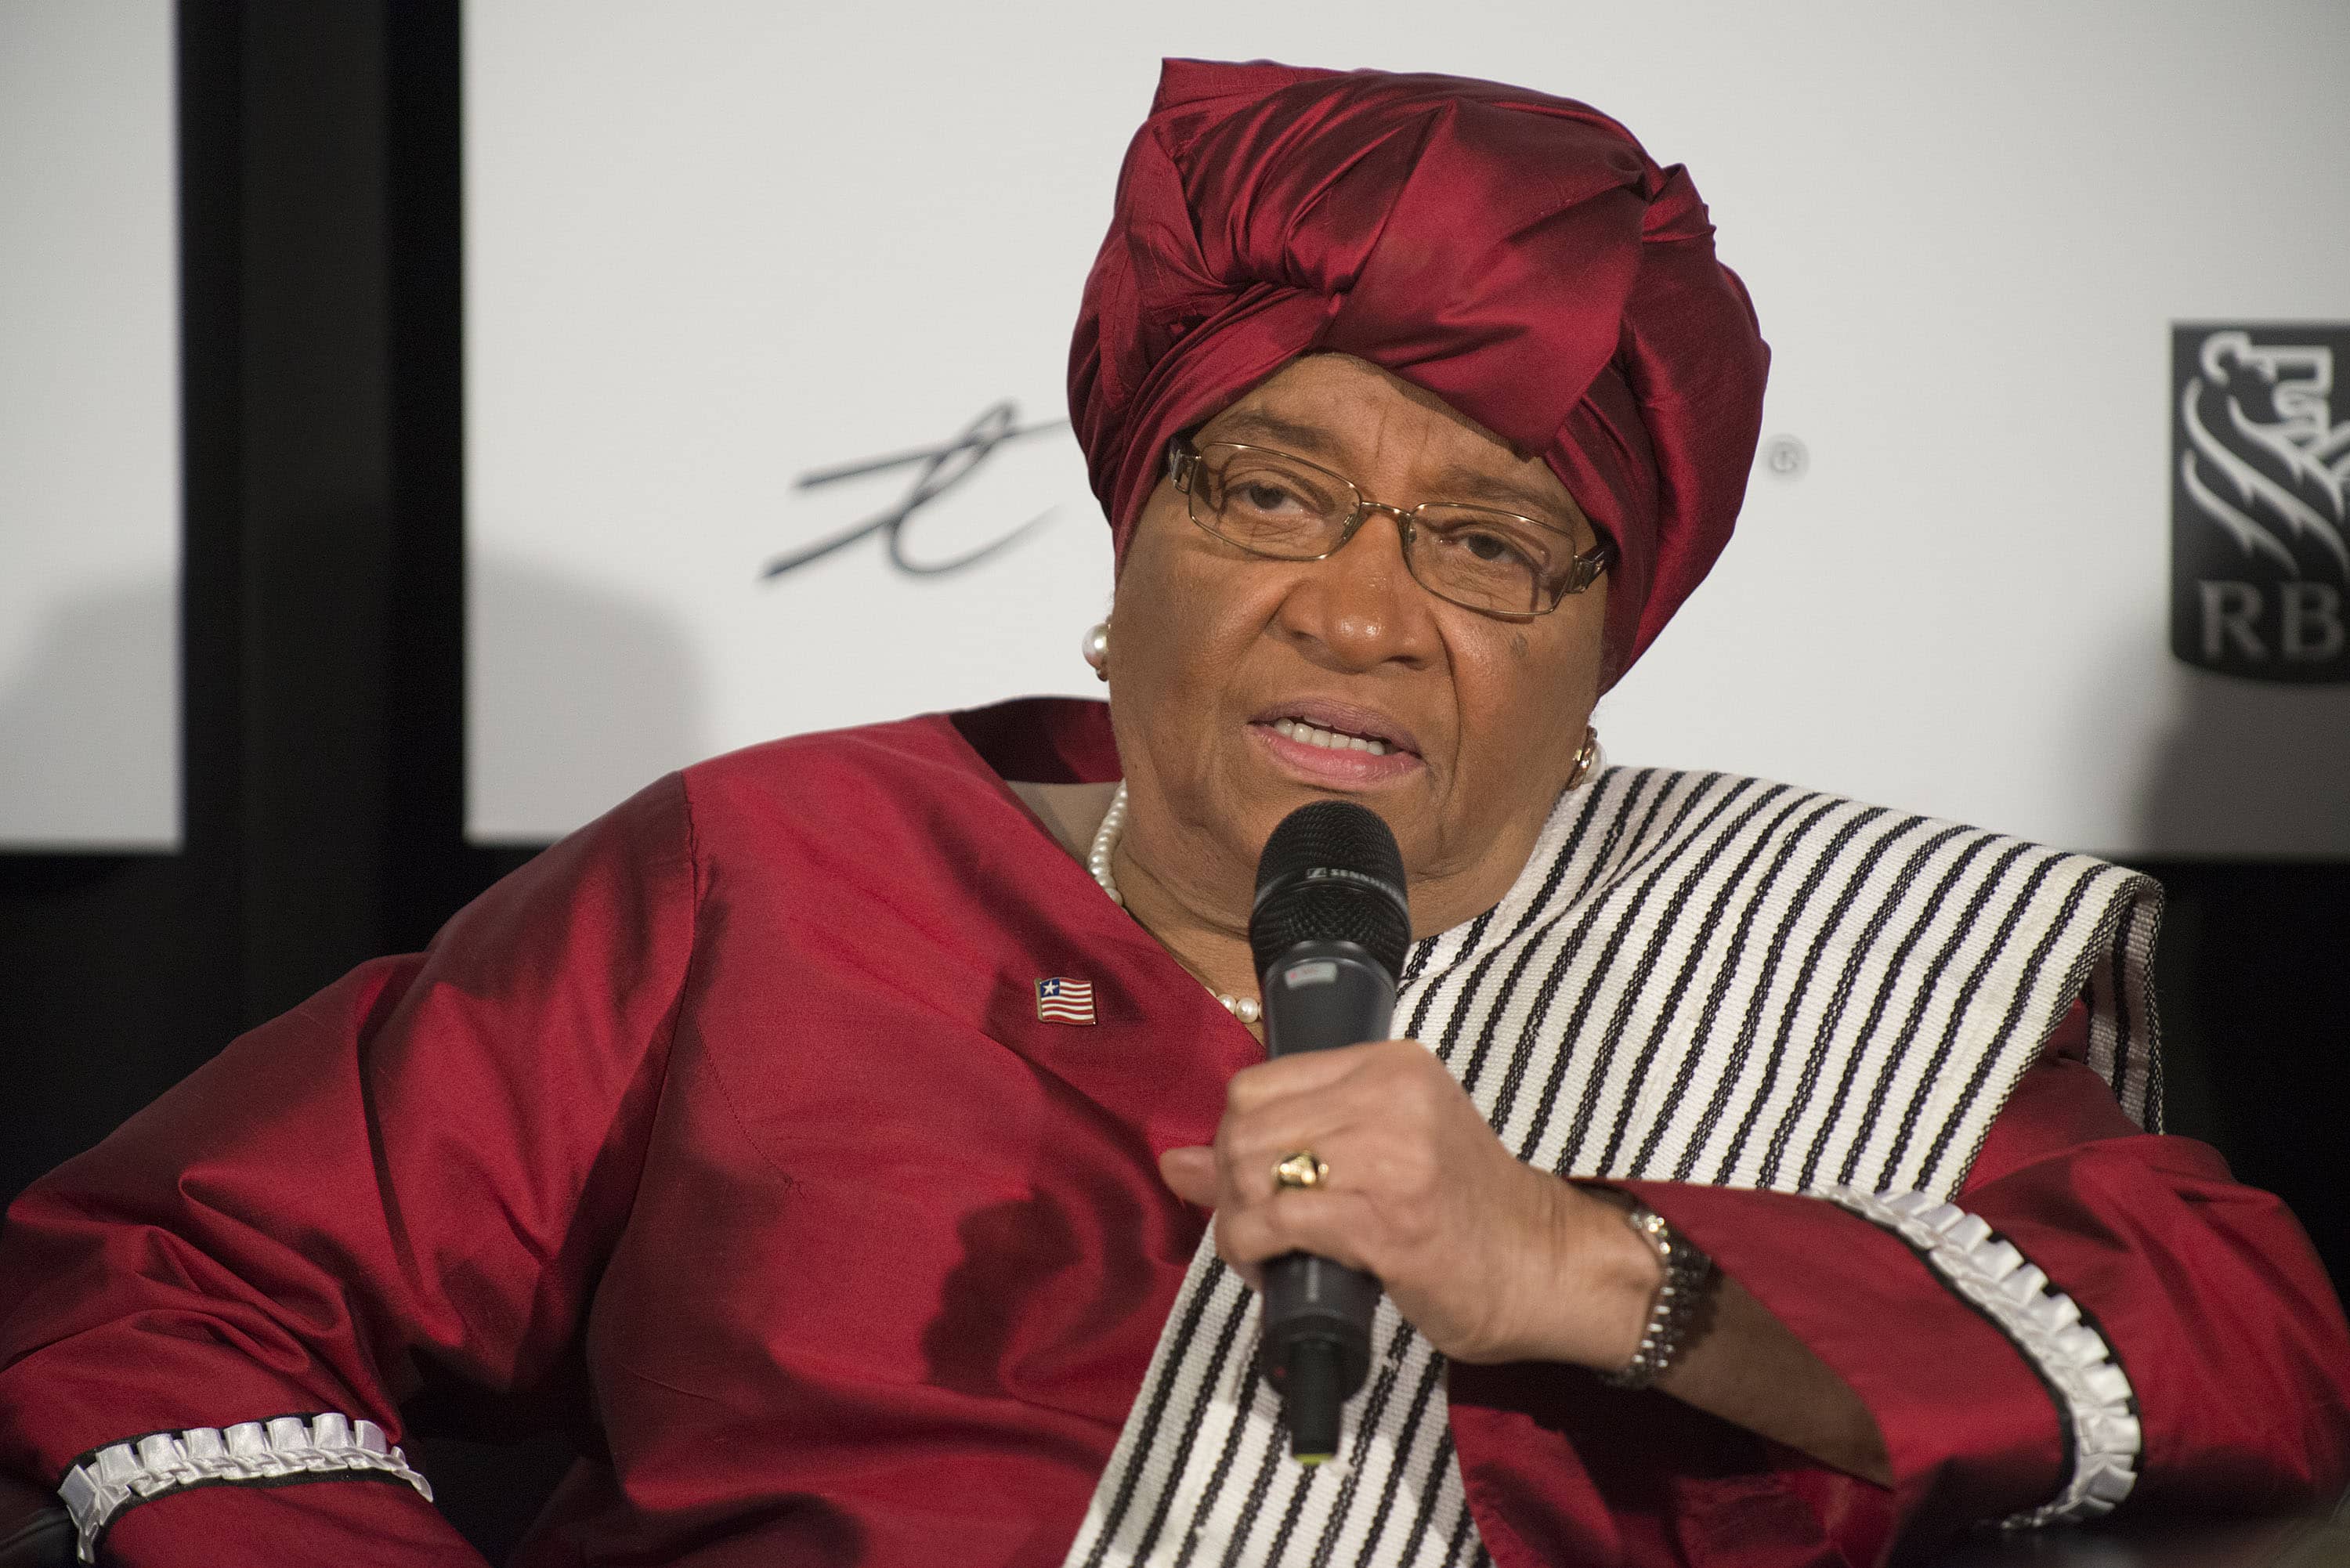 Liberian President Ellen Johnson Sirleaf speaks during We Day at the Air Canada Centre on Friday, Sept. 20, 2013, in Toronto, Canada. , Arthur Mola/Invision/AP